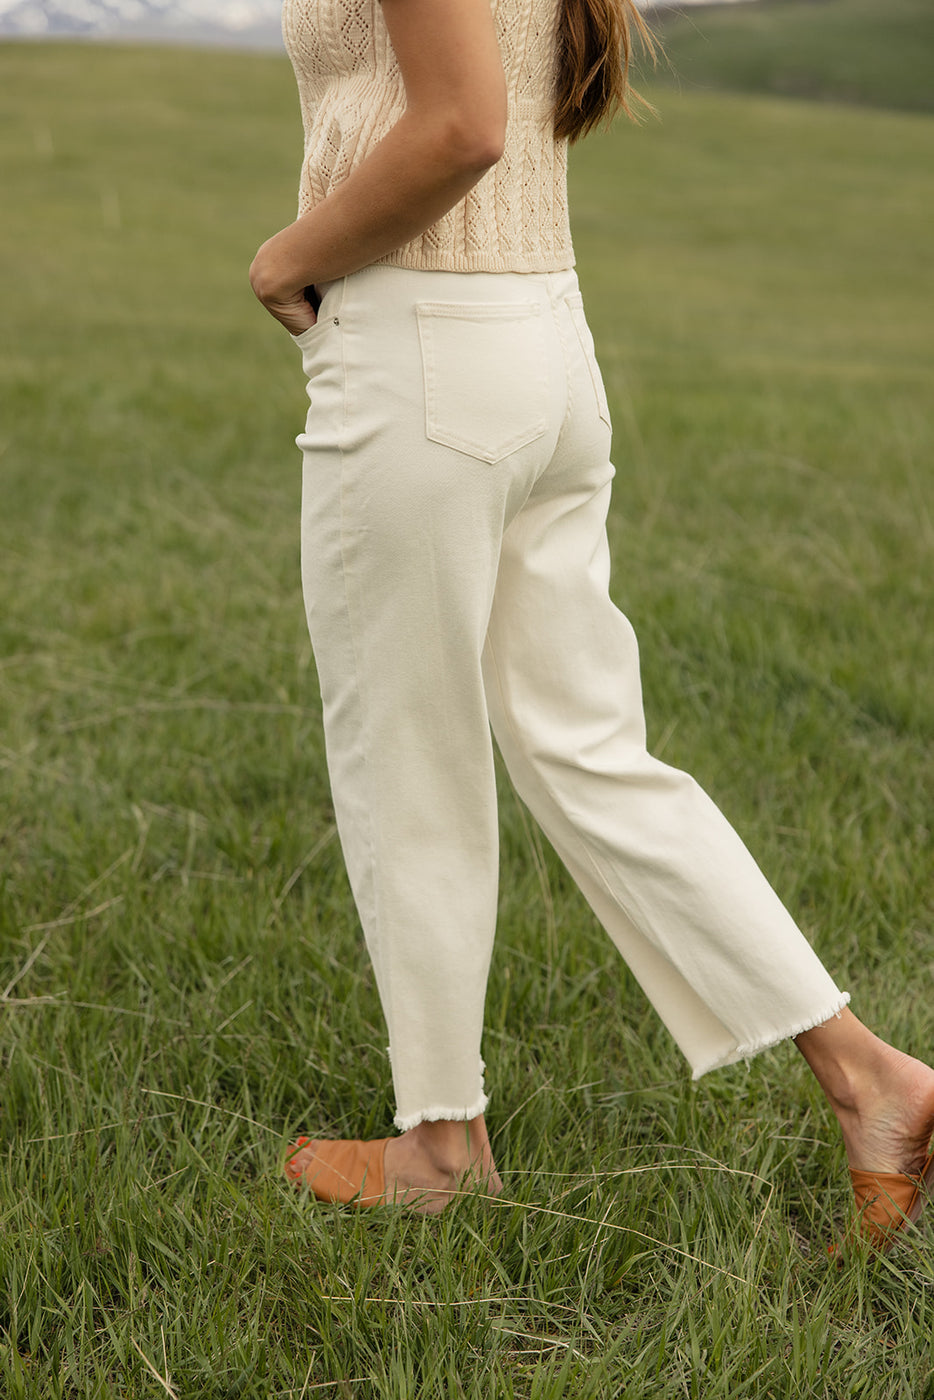 a person in white pants and sandals